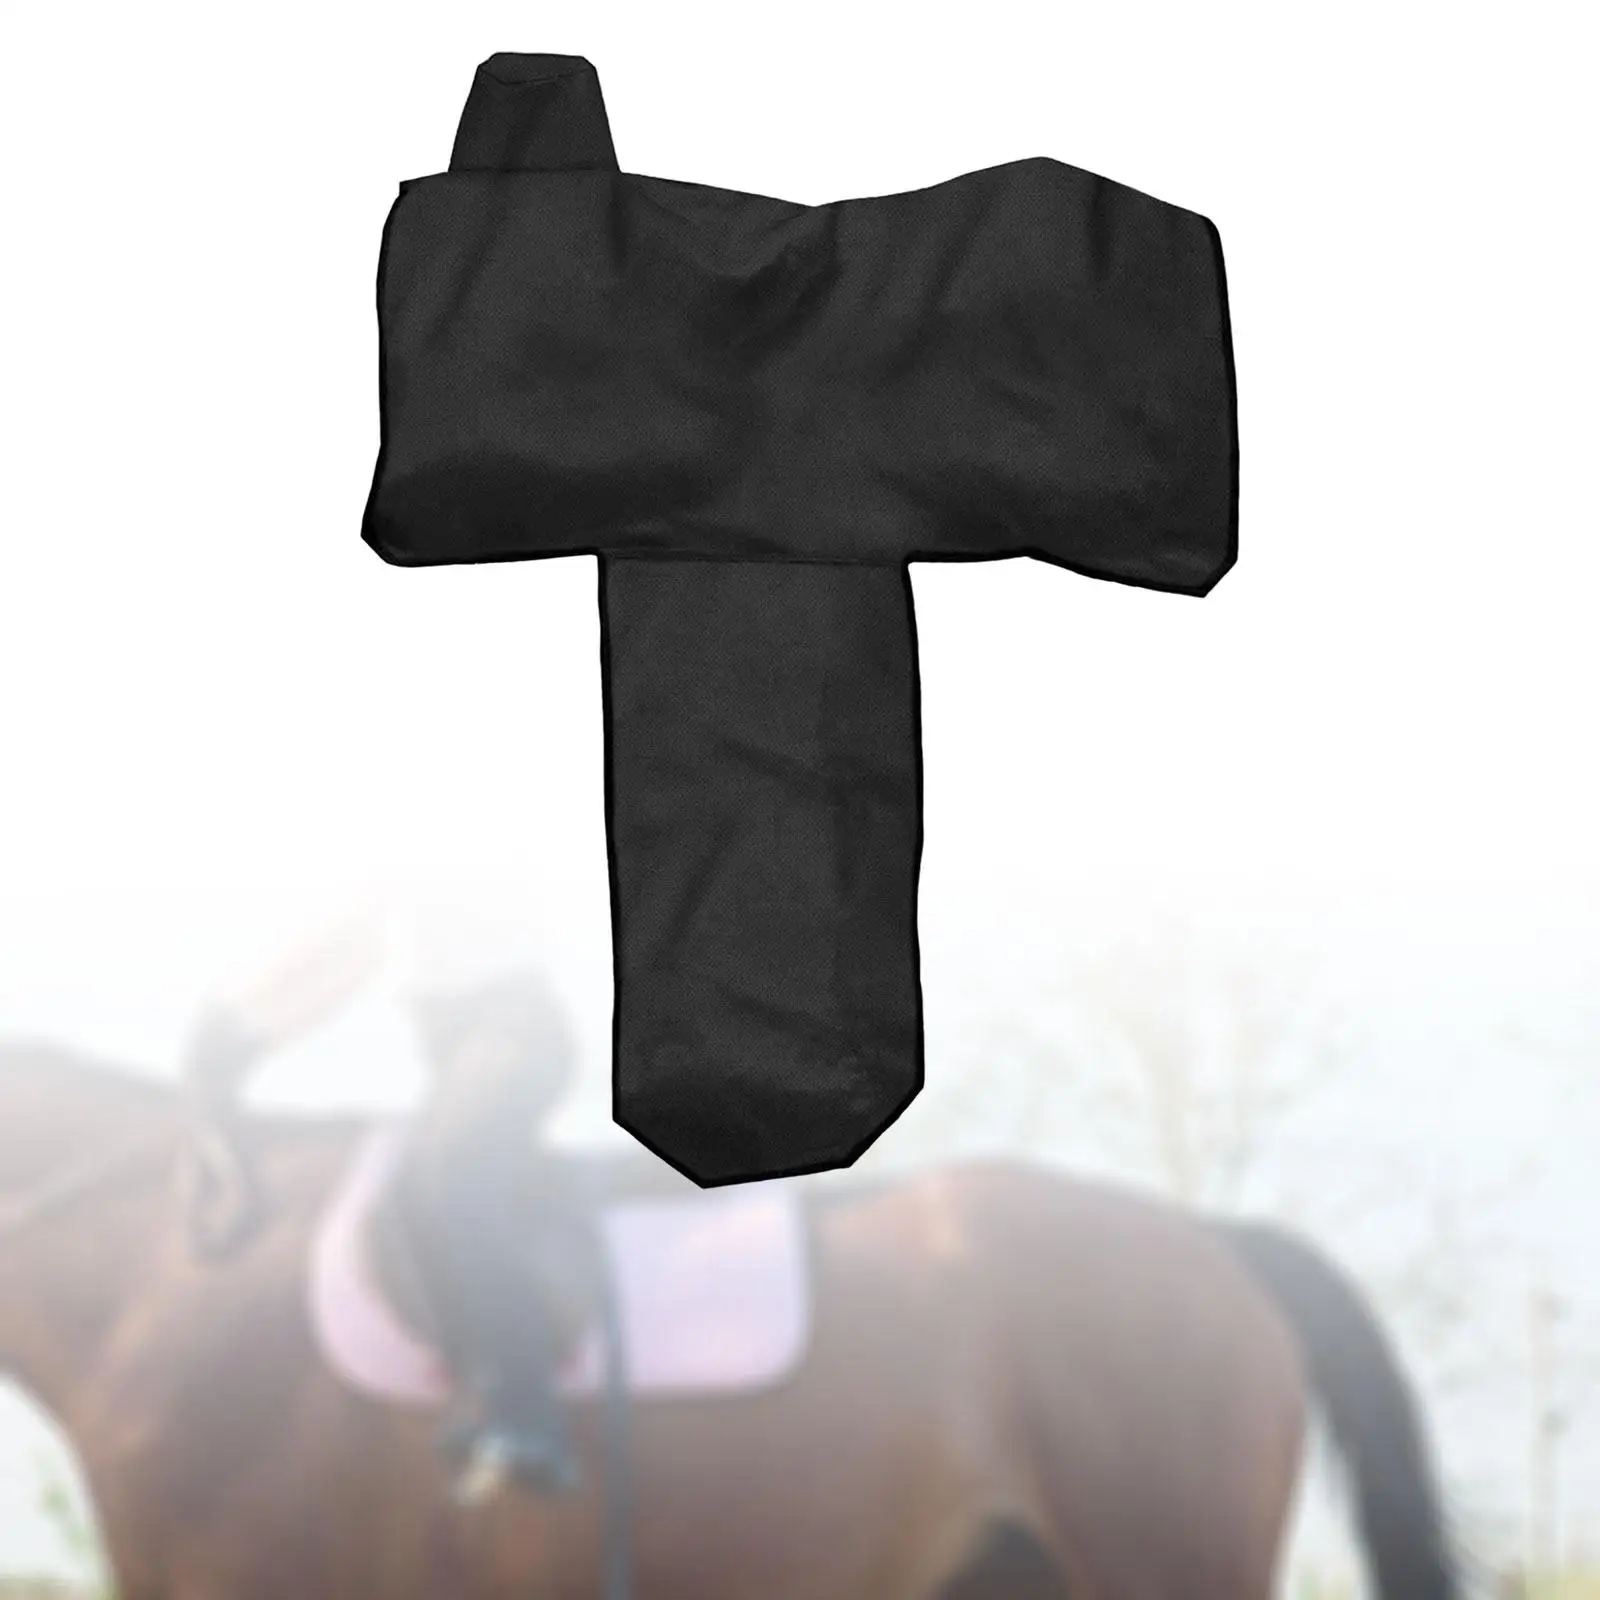 Saddle Cover Water Resistant Portable Protective Sleeve for Western Saddles